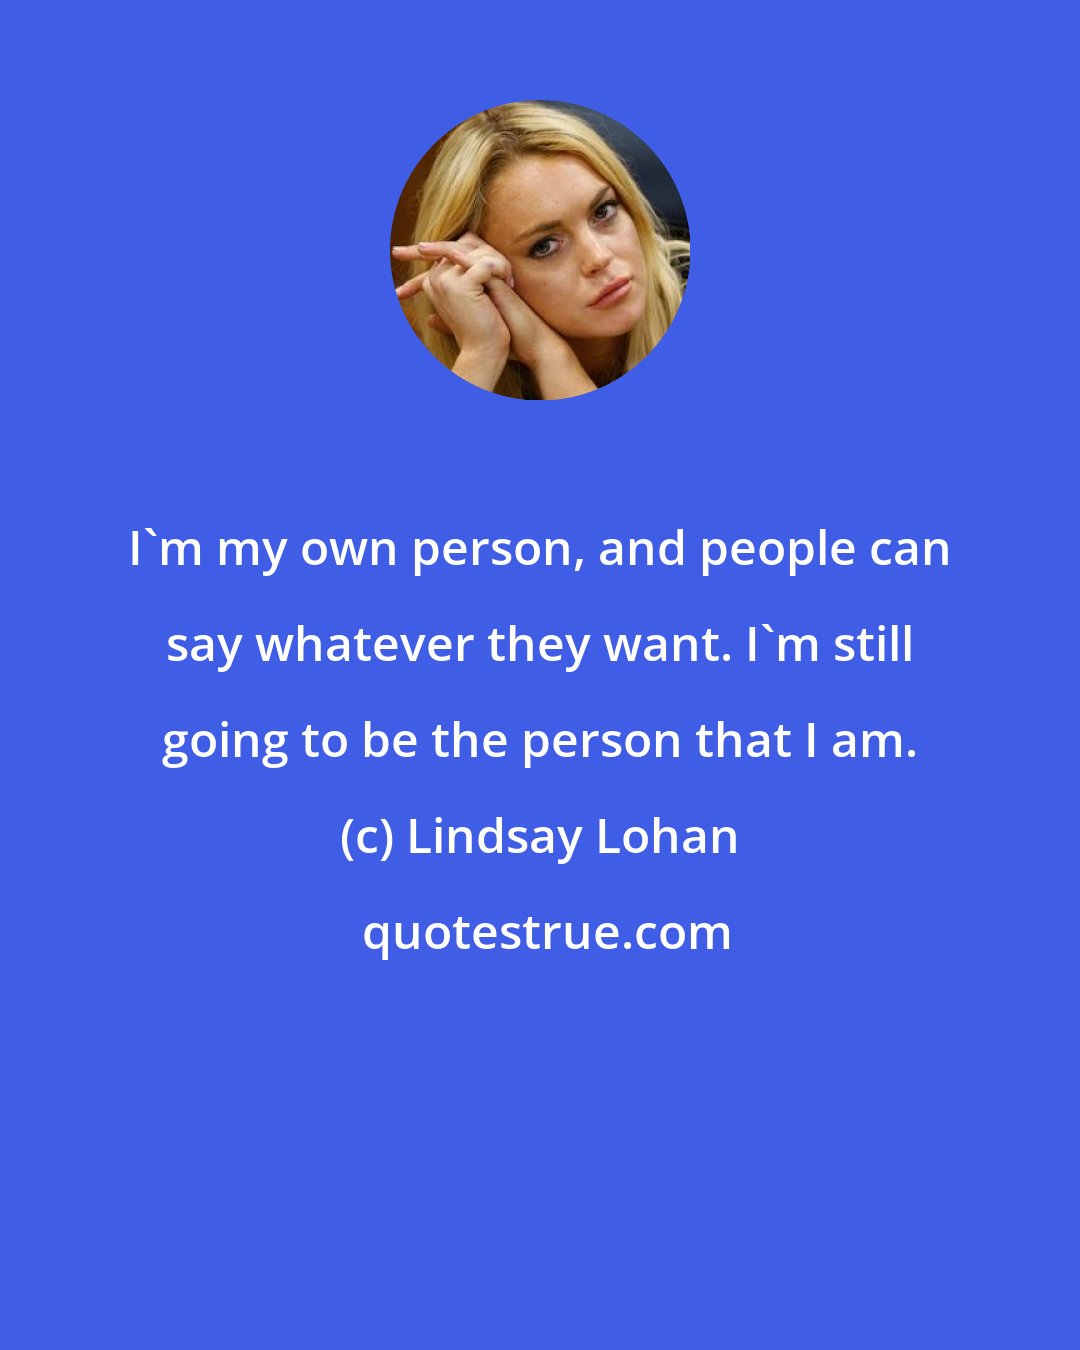 Lindsay Lohan: I'm my own person, and people can say whatever they want. I'm still going to be the person that I am.